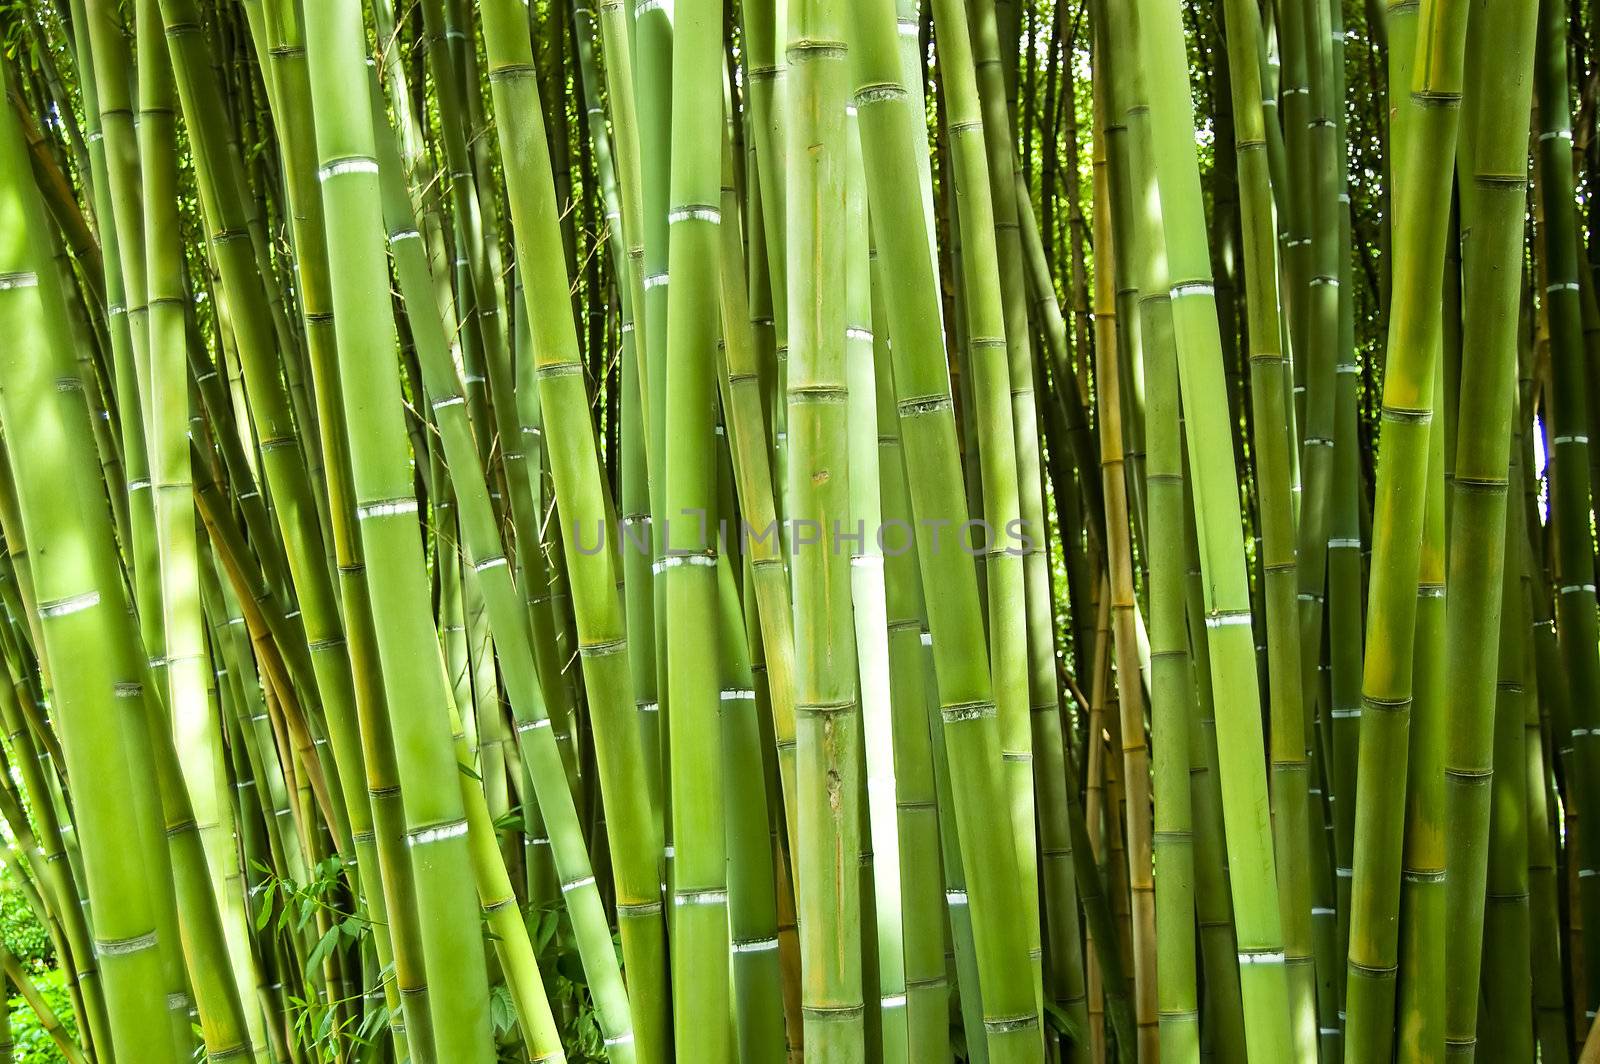 Lush and dense green bamboo grove in a park